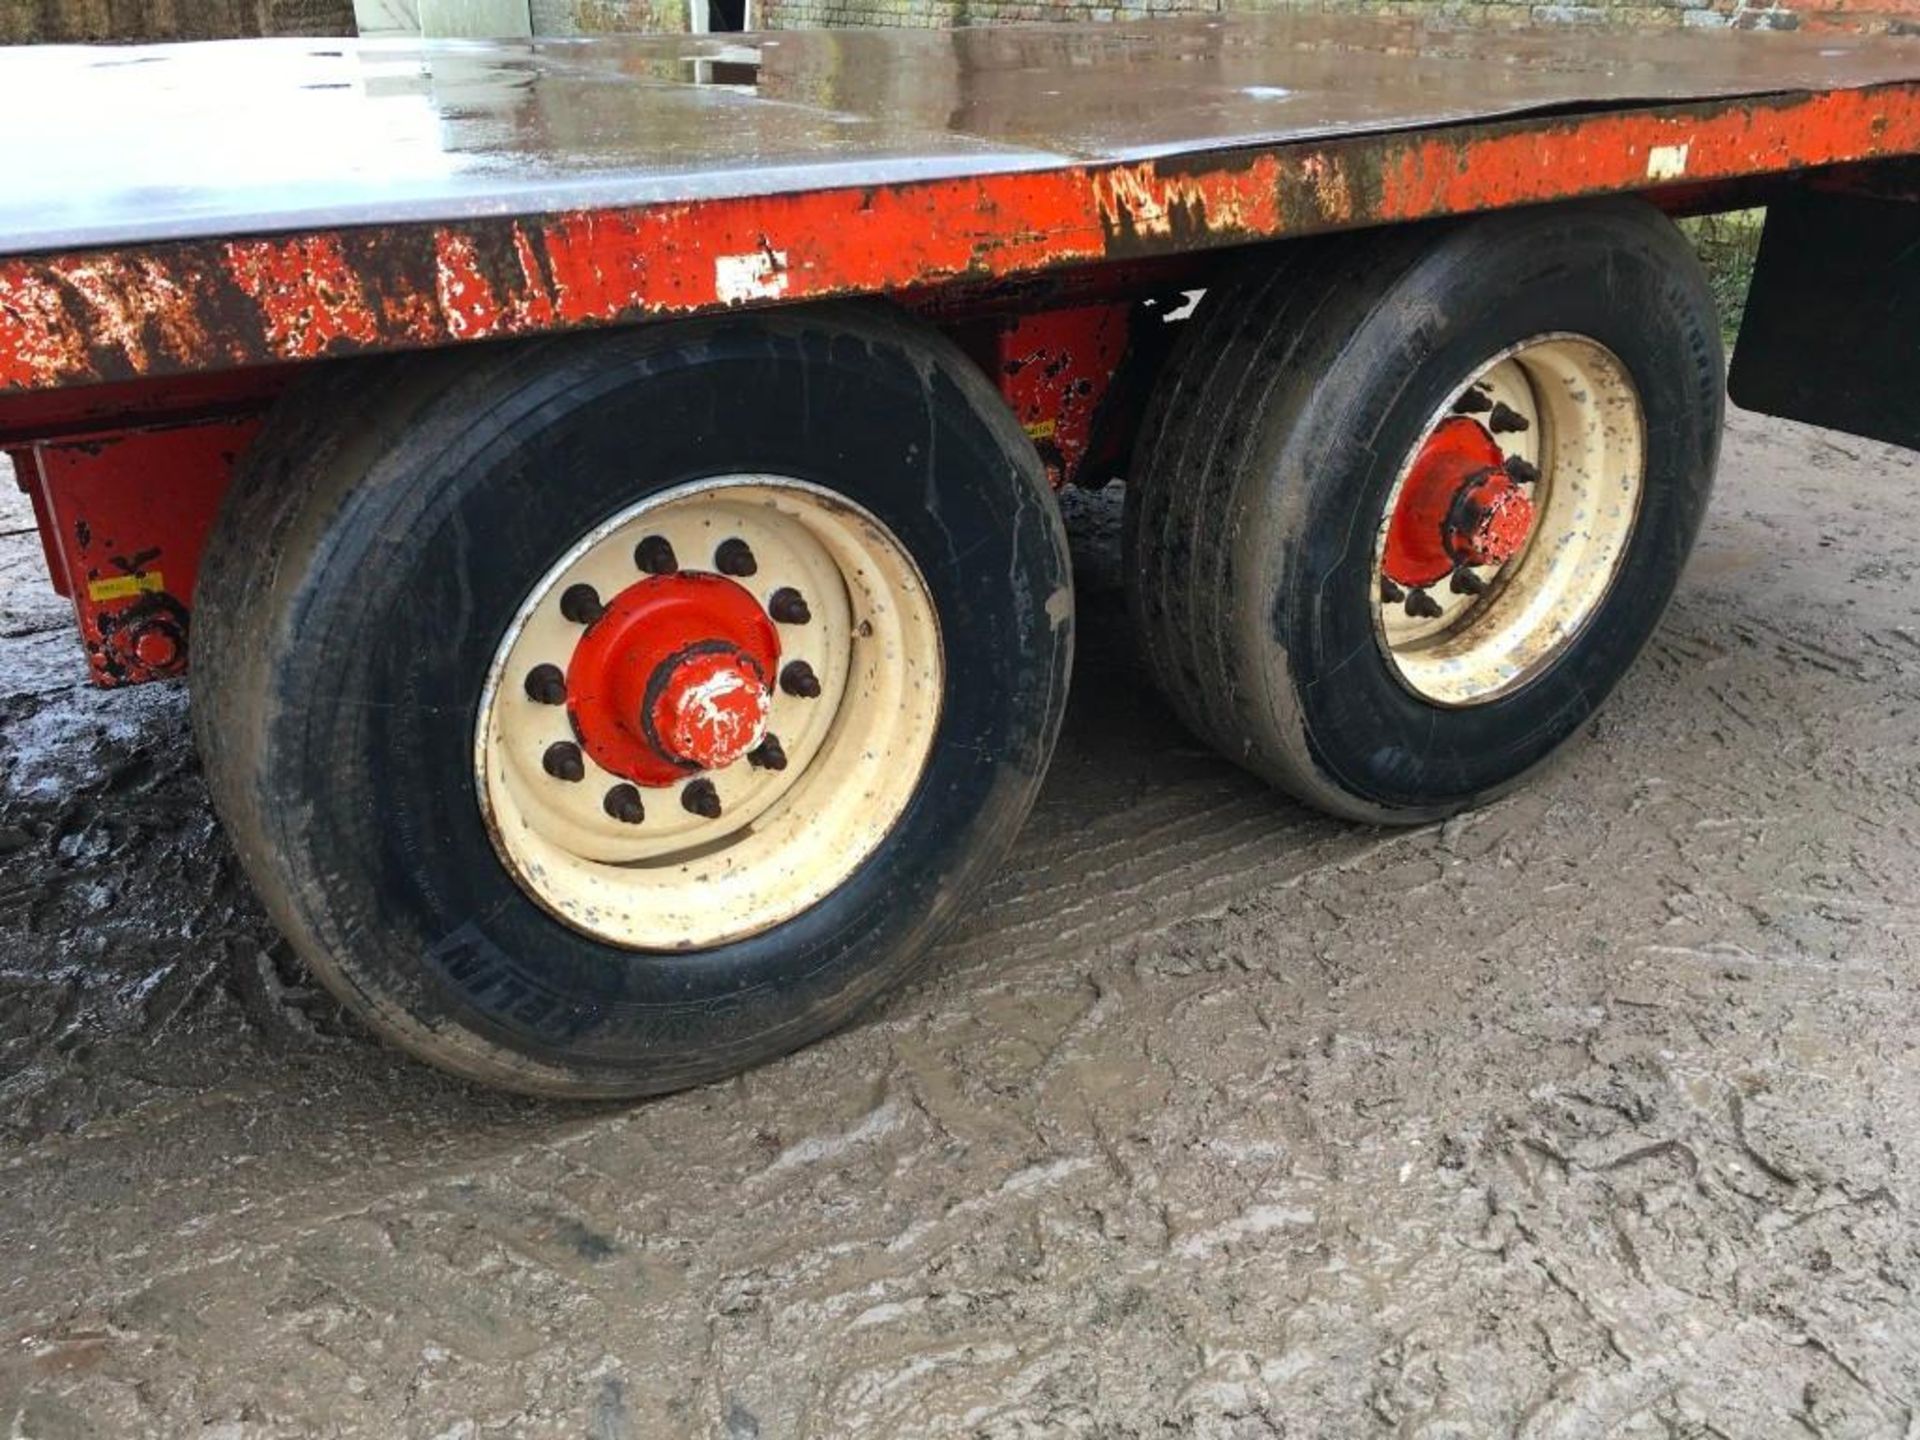 1995 Richard Larrington twin axle flatbed trailer with commercial axle, hydraulic brakes, sprung dra - Image 6 of 7